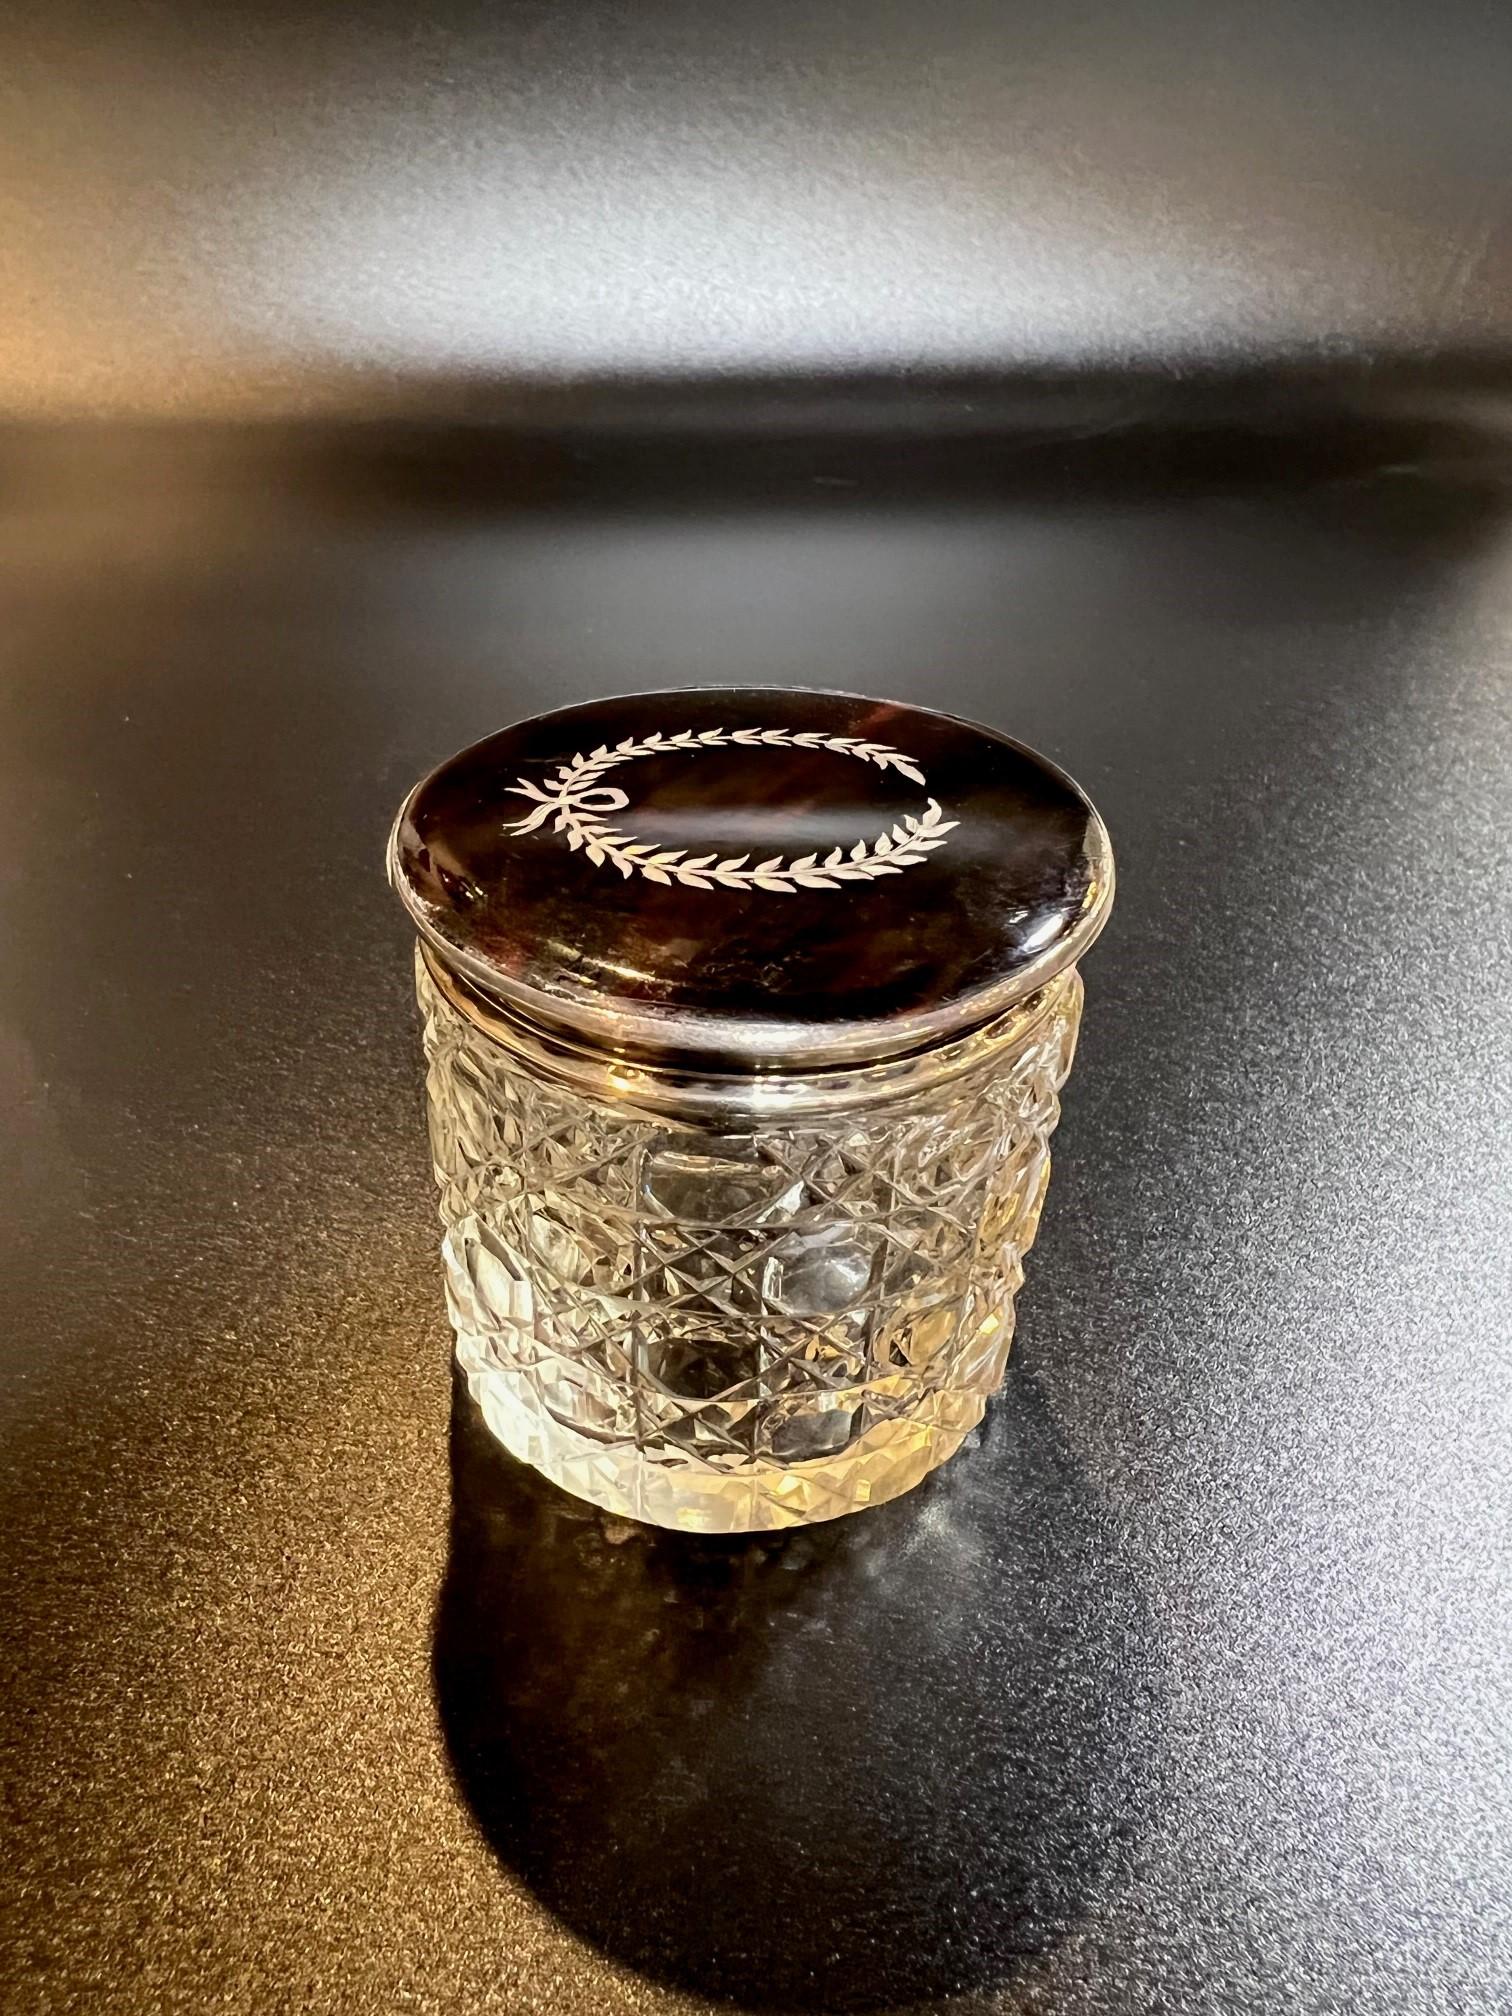 Early 20th century English cut crystal dresser jar with a tortoise shell and sterling silver lid with inlay. This is a beautiful and hard to find piece from a private collector who traveled the world buying beautiful items. A very nice looking piece